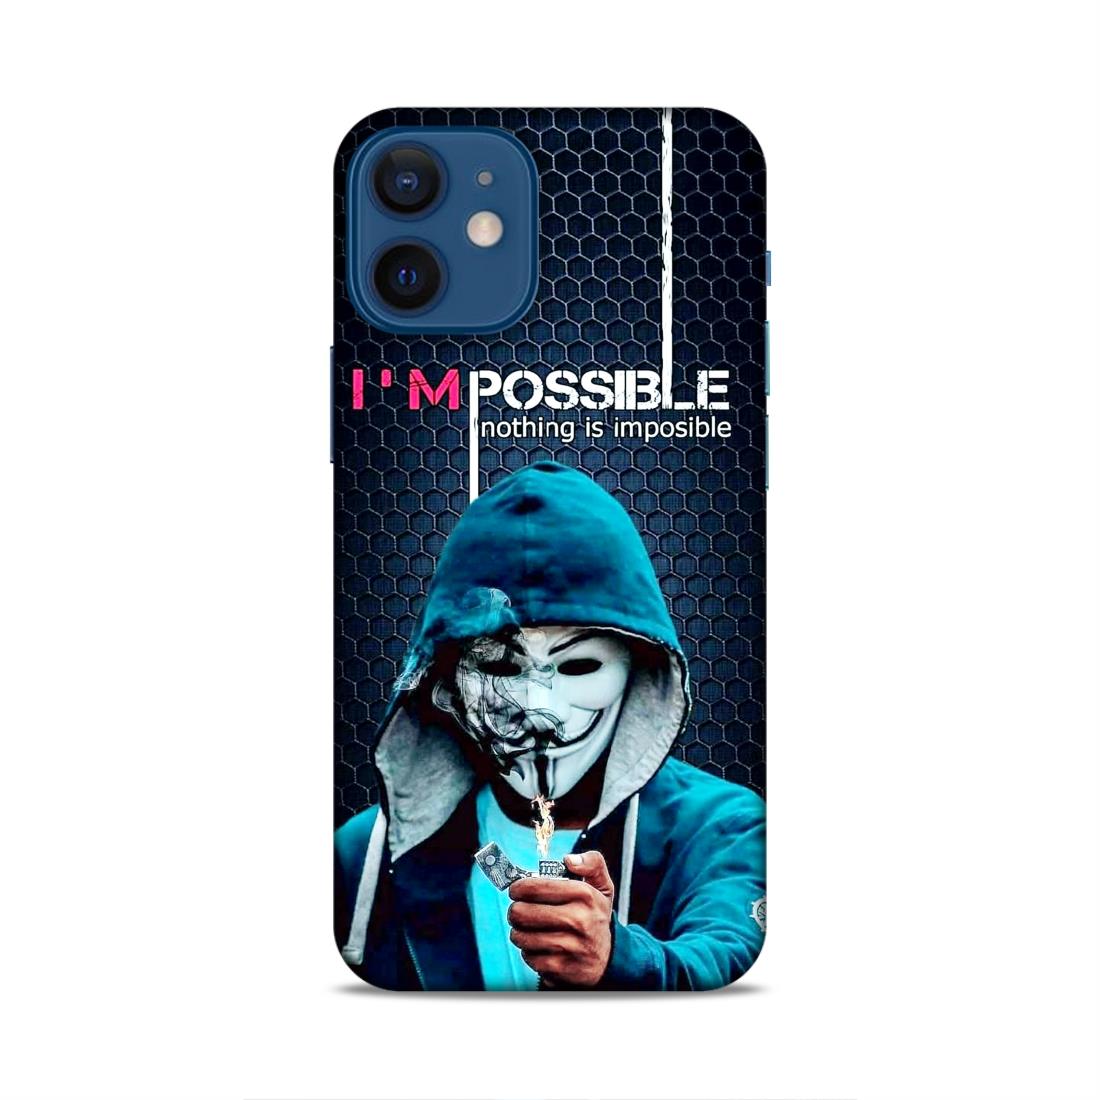 Im Possible Hard Back Case For Apple iPhone 12 Mini